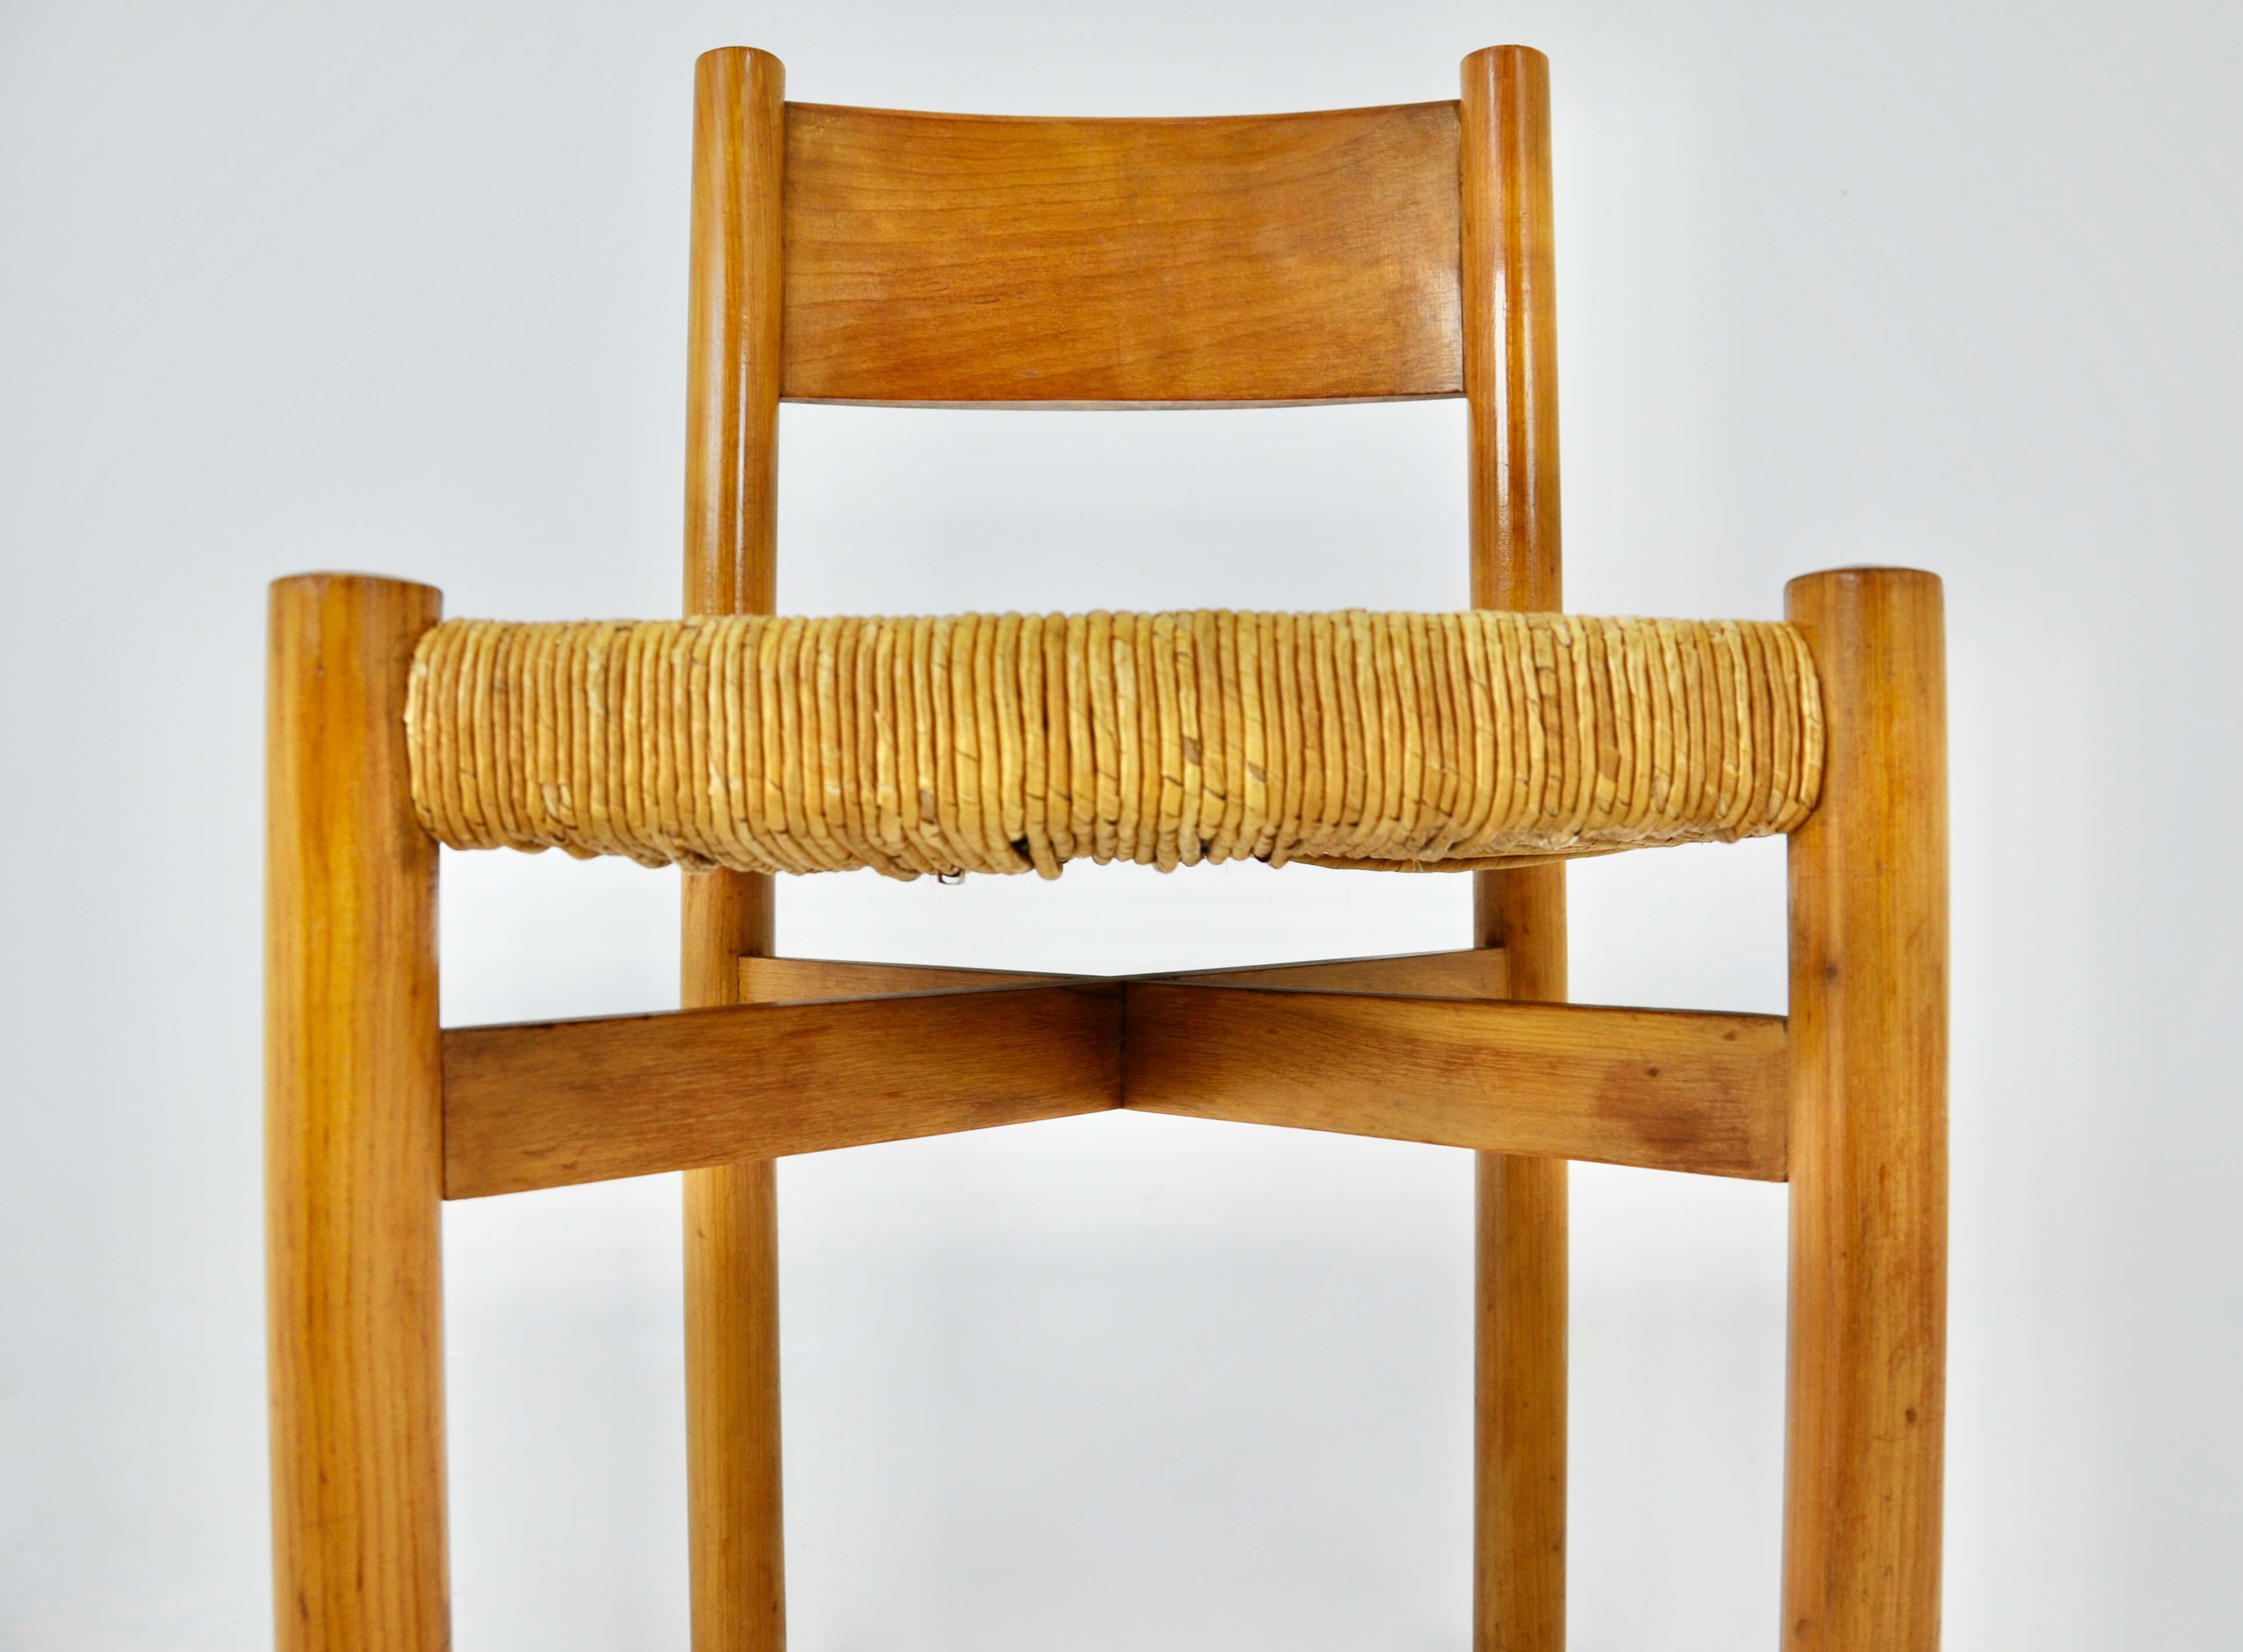 Vintage wooden Meribel chair with straw seat by Charlotte Perriand for  Steph Simon, 1950